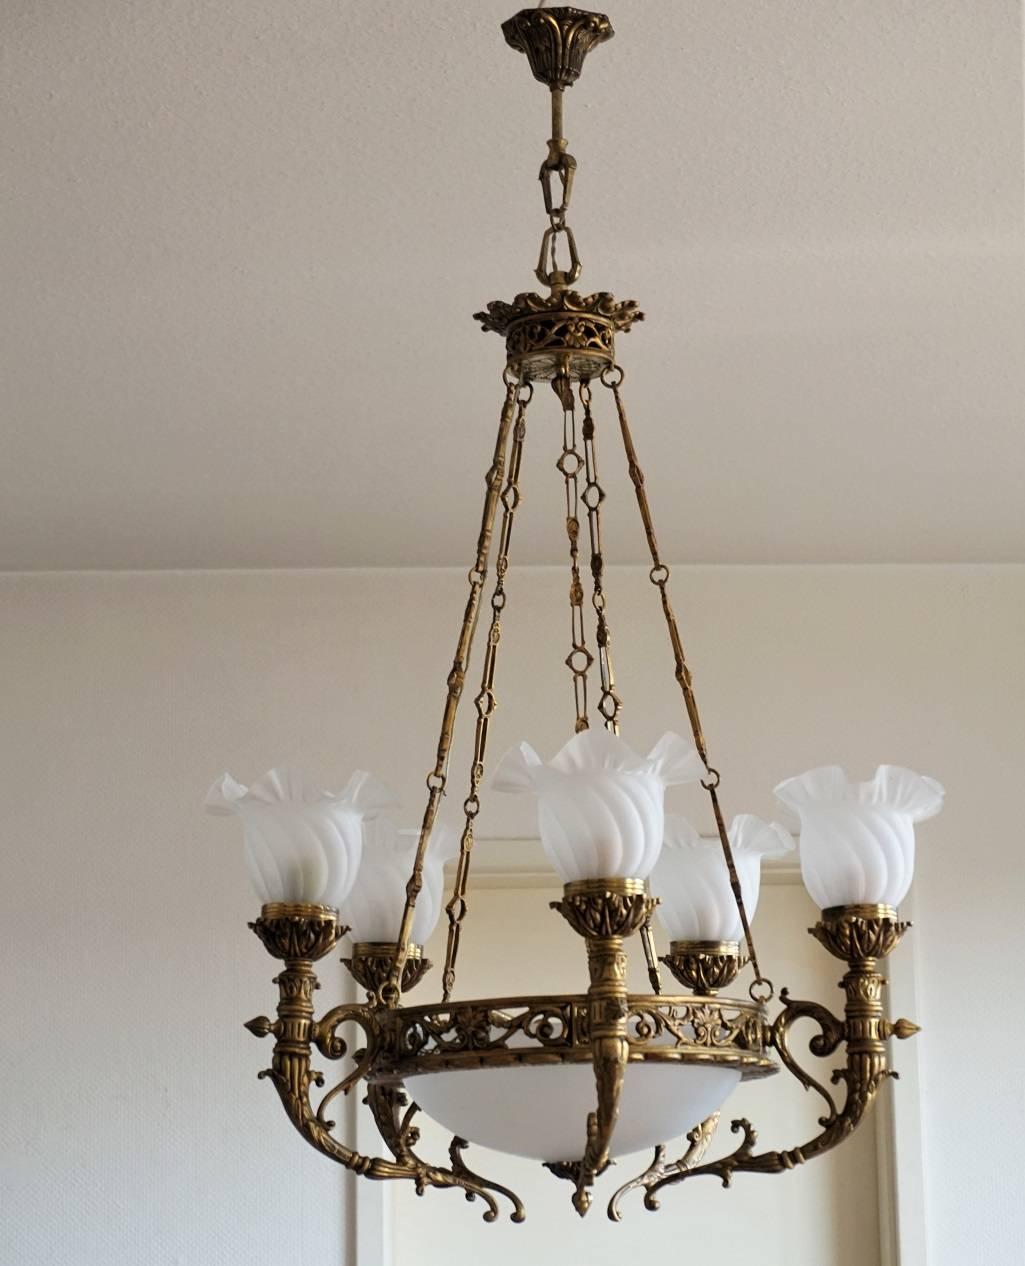 A large Art Deco gilt bronze seven-light chandelier, France circa 1920, crown-shaped with frosted glass bowl surrounded by five lamp arms with frosted glass shades. Five hanging chains connected to a decorative canopy. 

Measures:
Height 45.50 in